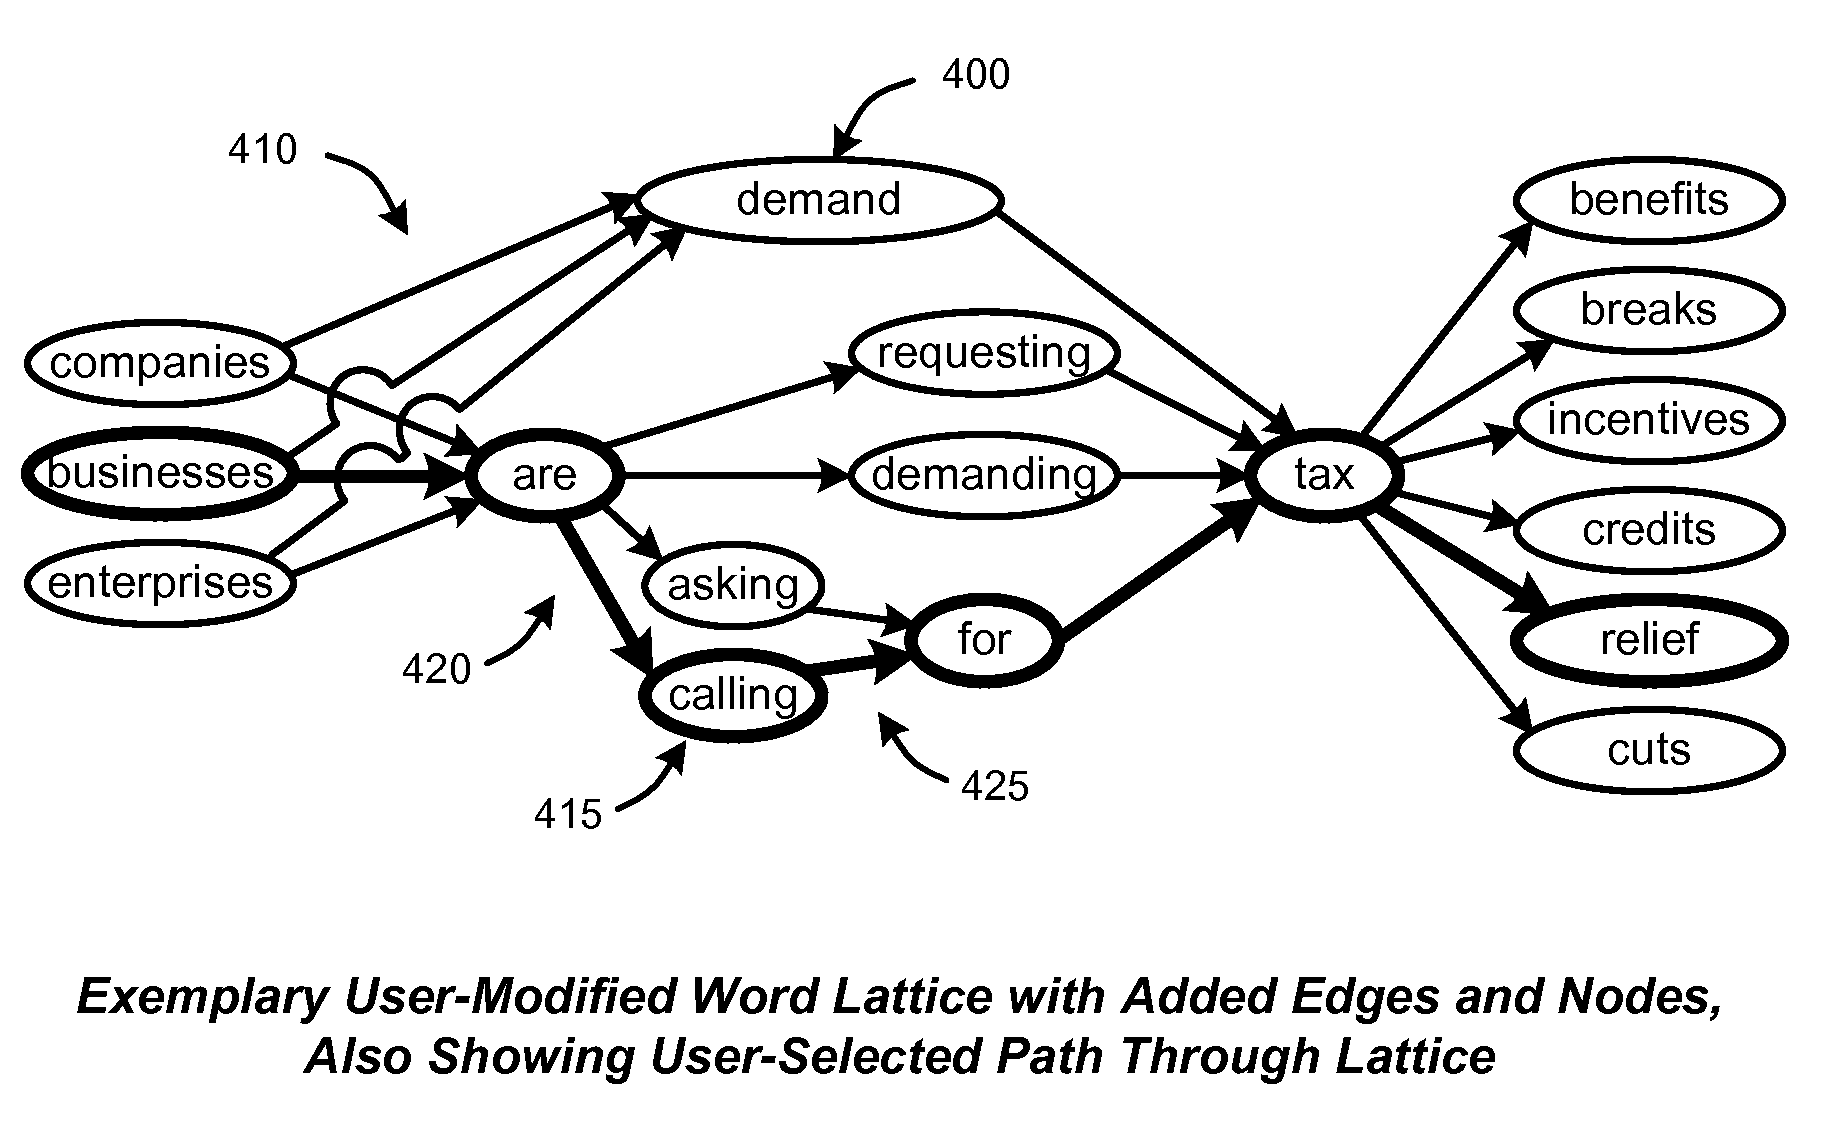 User-modifiable word lattice display for editing documents and search queries